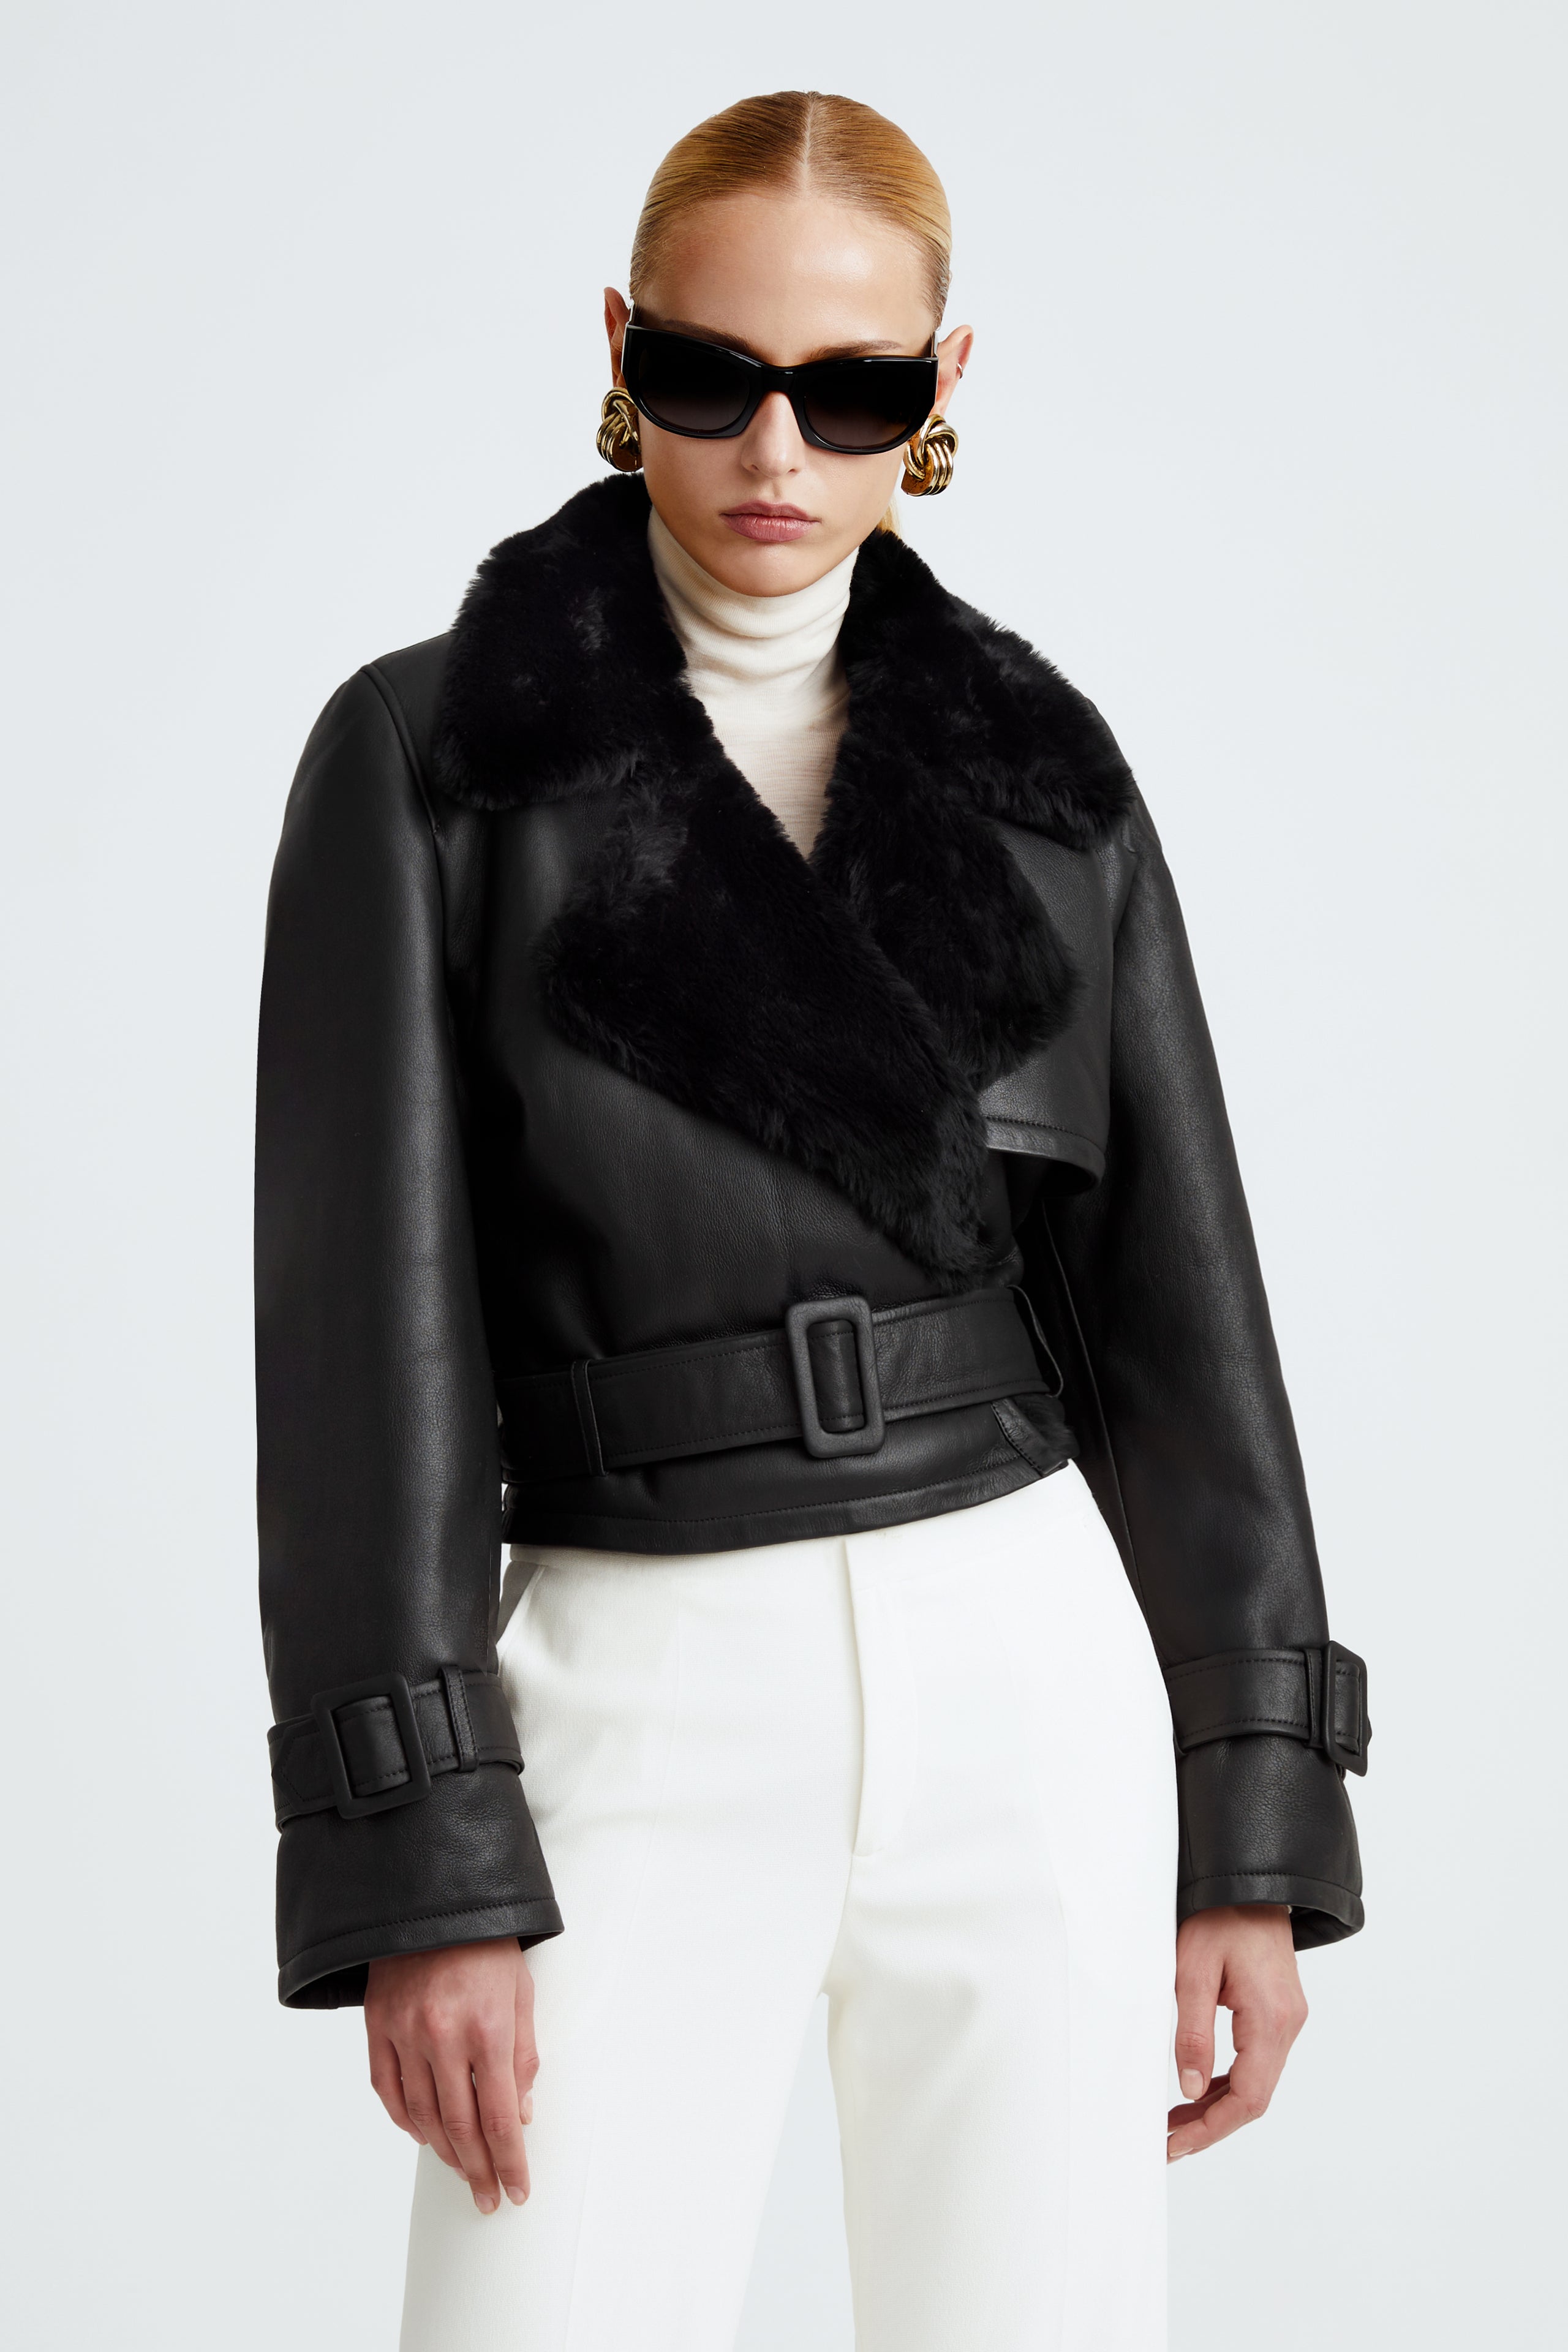 Model is wearing the Hatti Shearling Black Cropped Shearling Jacket Close Up